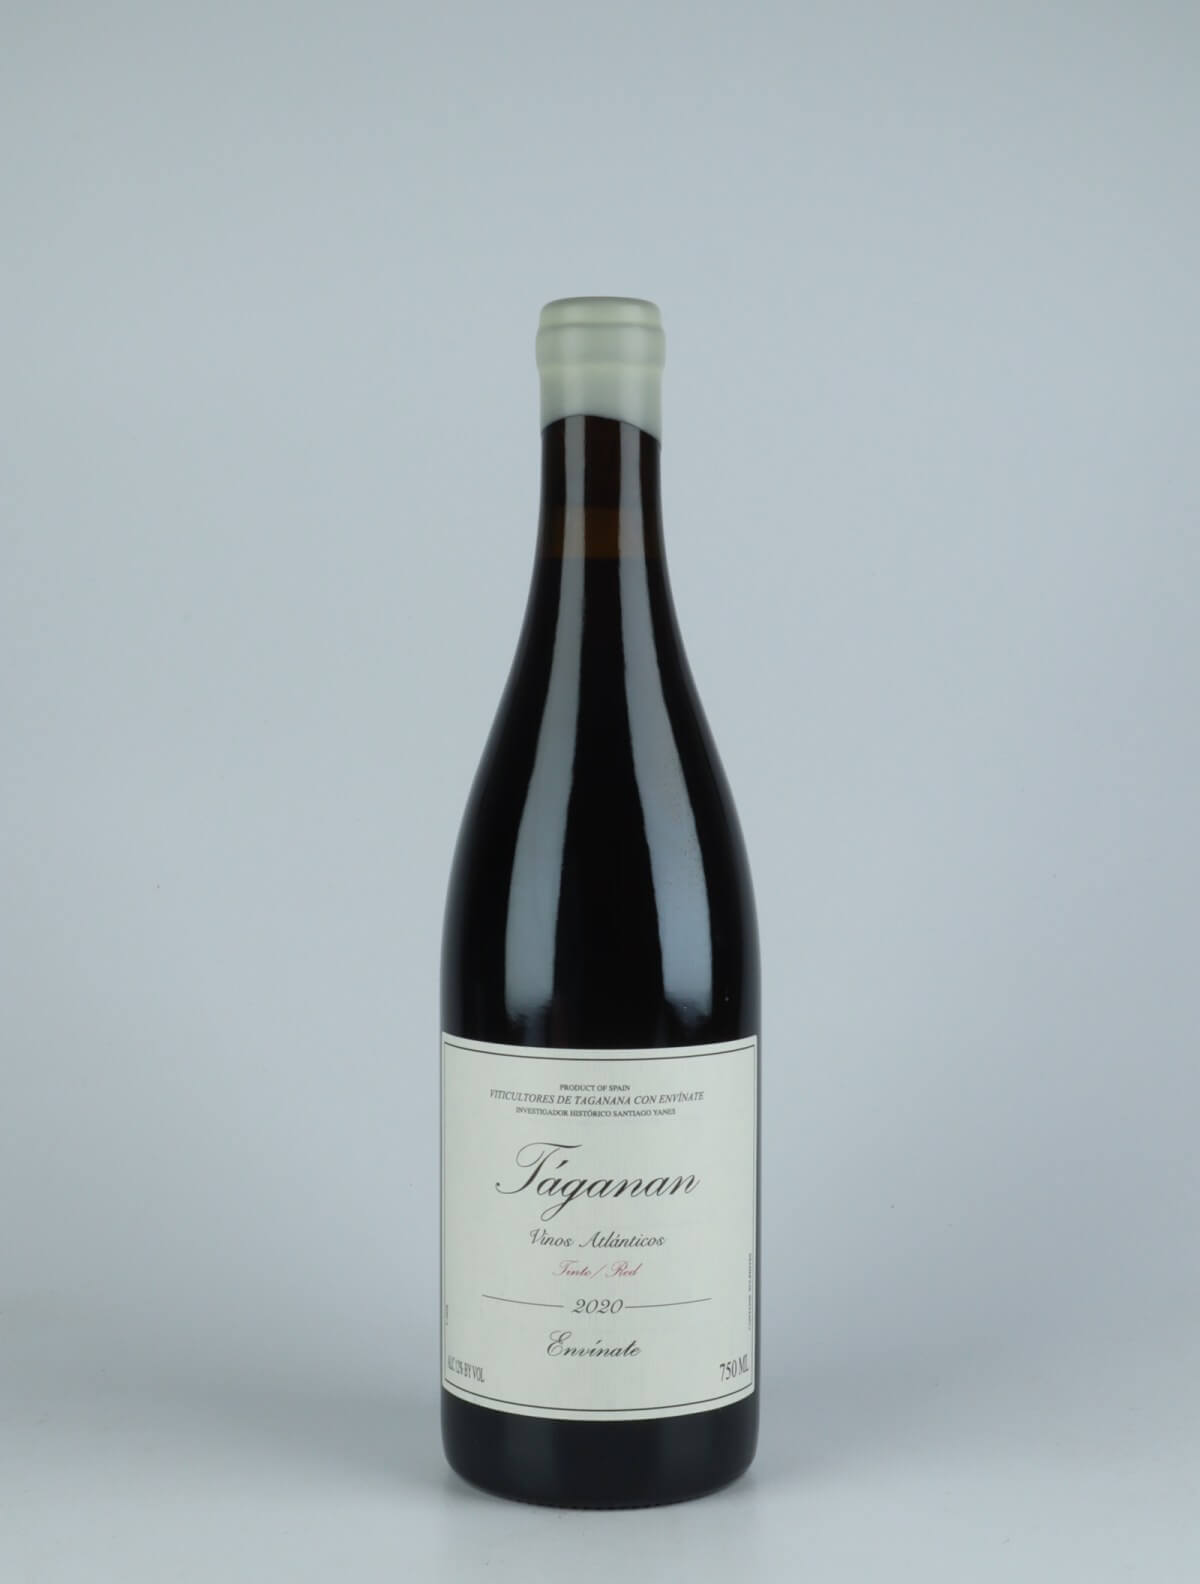 A bottle 2020 Taganan Tinto - Tenerife Red wine from Envínate,  in Spain